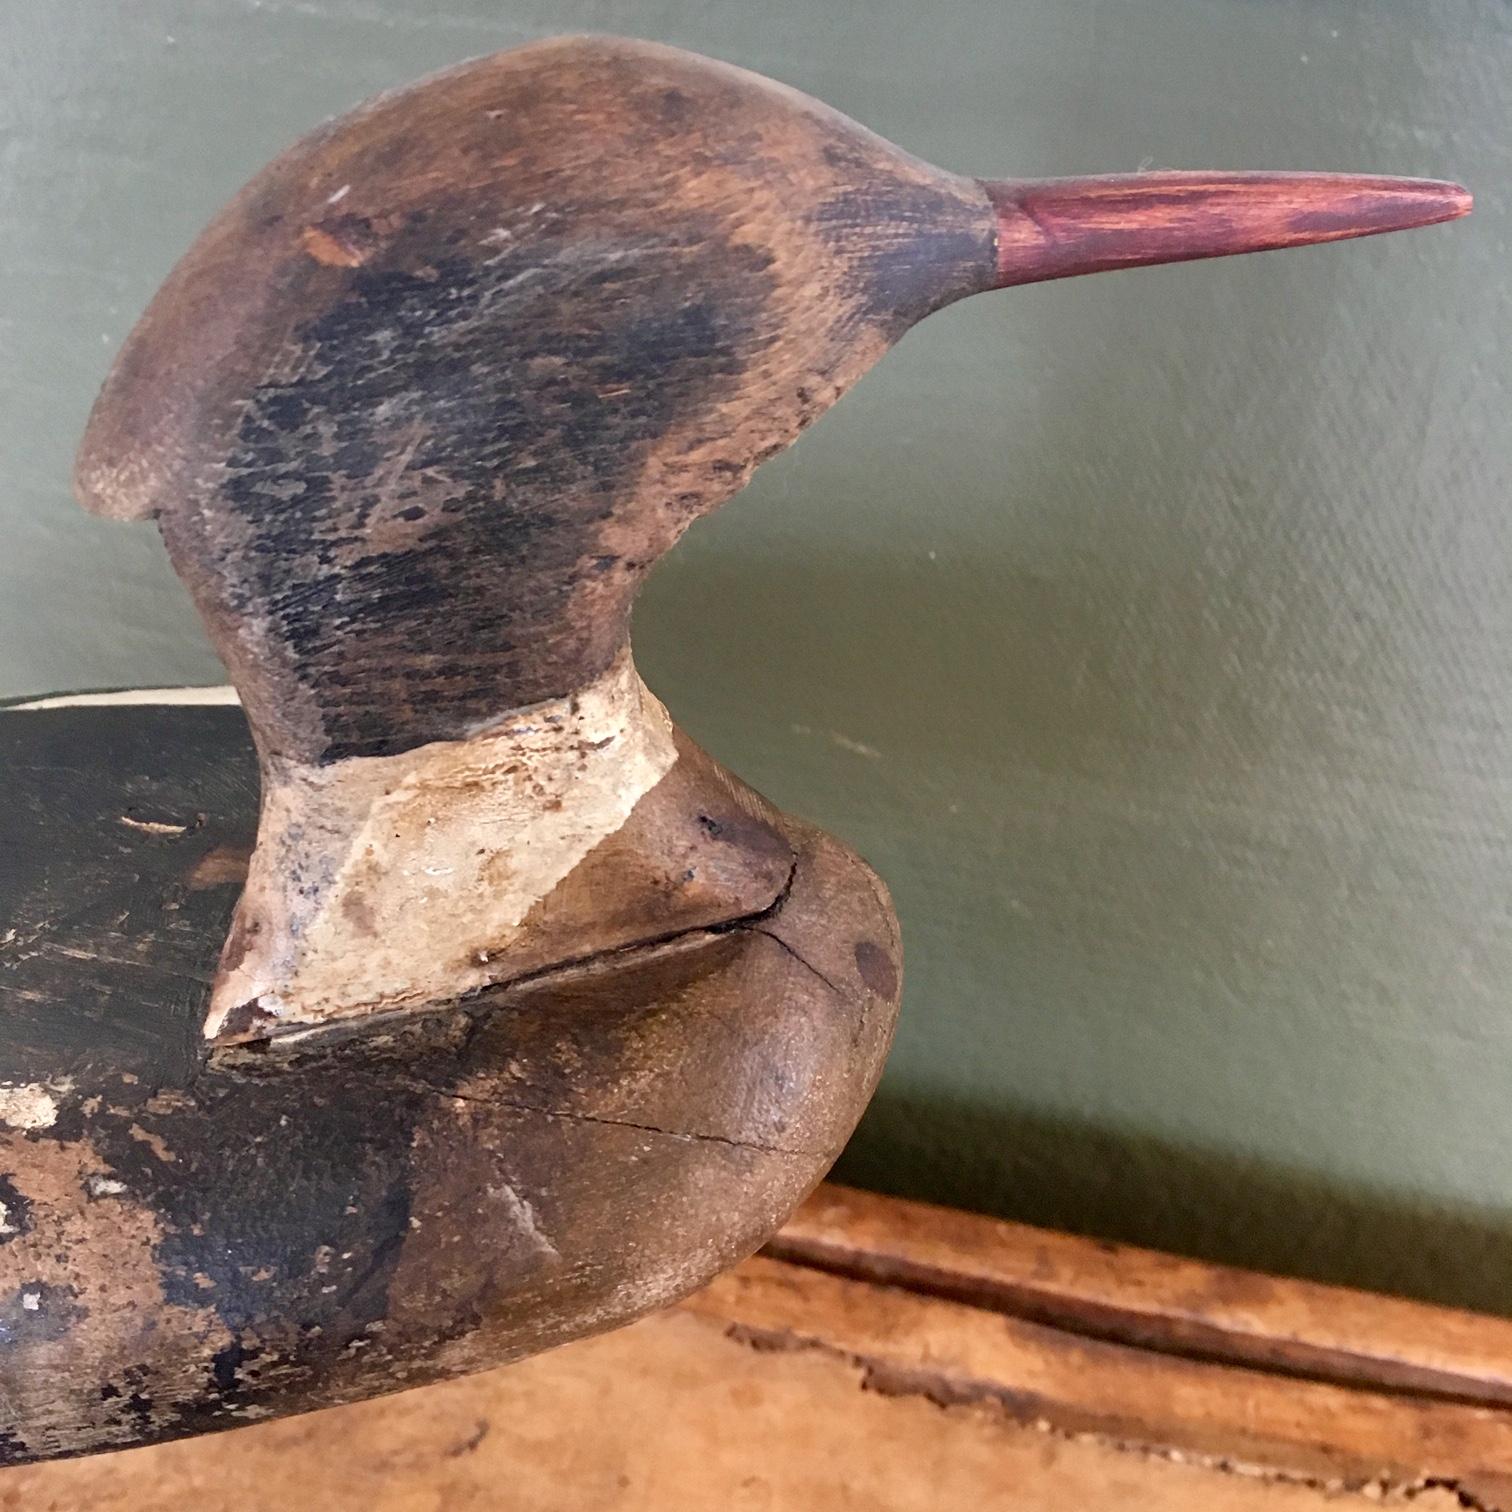 Long Island Merganser Drake Decoy, circa 1910, with sleek low, flat, racy body and head turned at alert posture. The head and body are in great condition with original worn paint. The bottom has received working repaints as would be expected with a